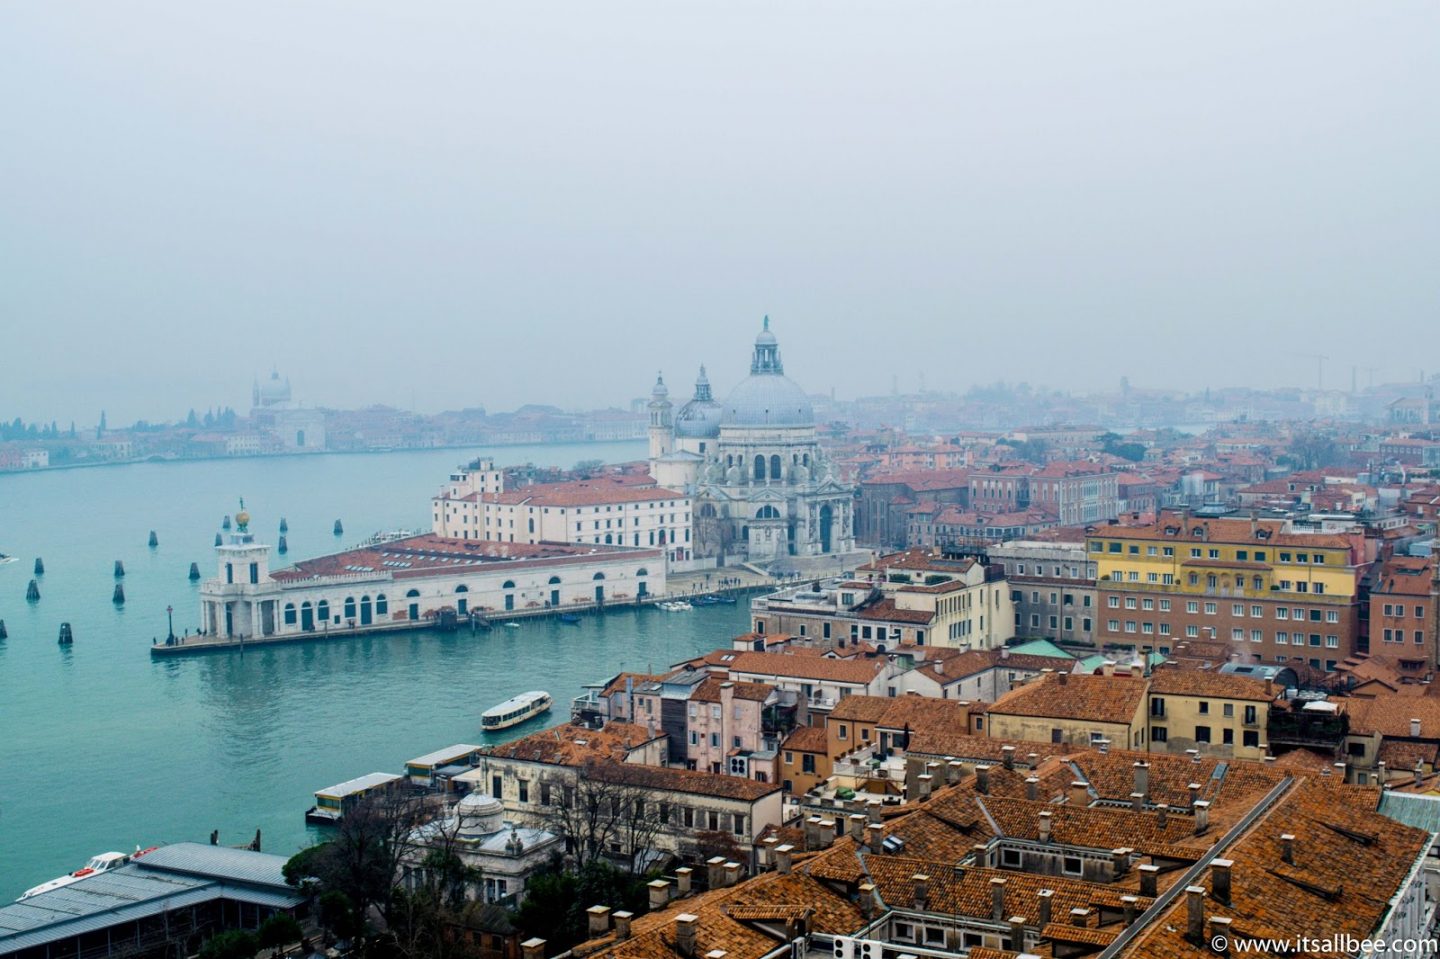 Venice winter travel tips - Things To Do In Venice In Winter. Places to visit in Venice Italy during winter months(December, January, February). #europe #italy #traveltips #winter - winter travel destinations - Venice italy food - #destinations venice travel tips #italian #gondola #sanmarcosquare #burano - venice travel guide - 